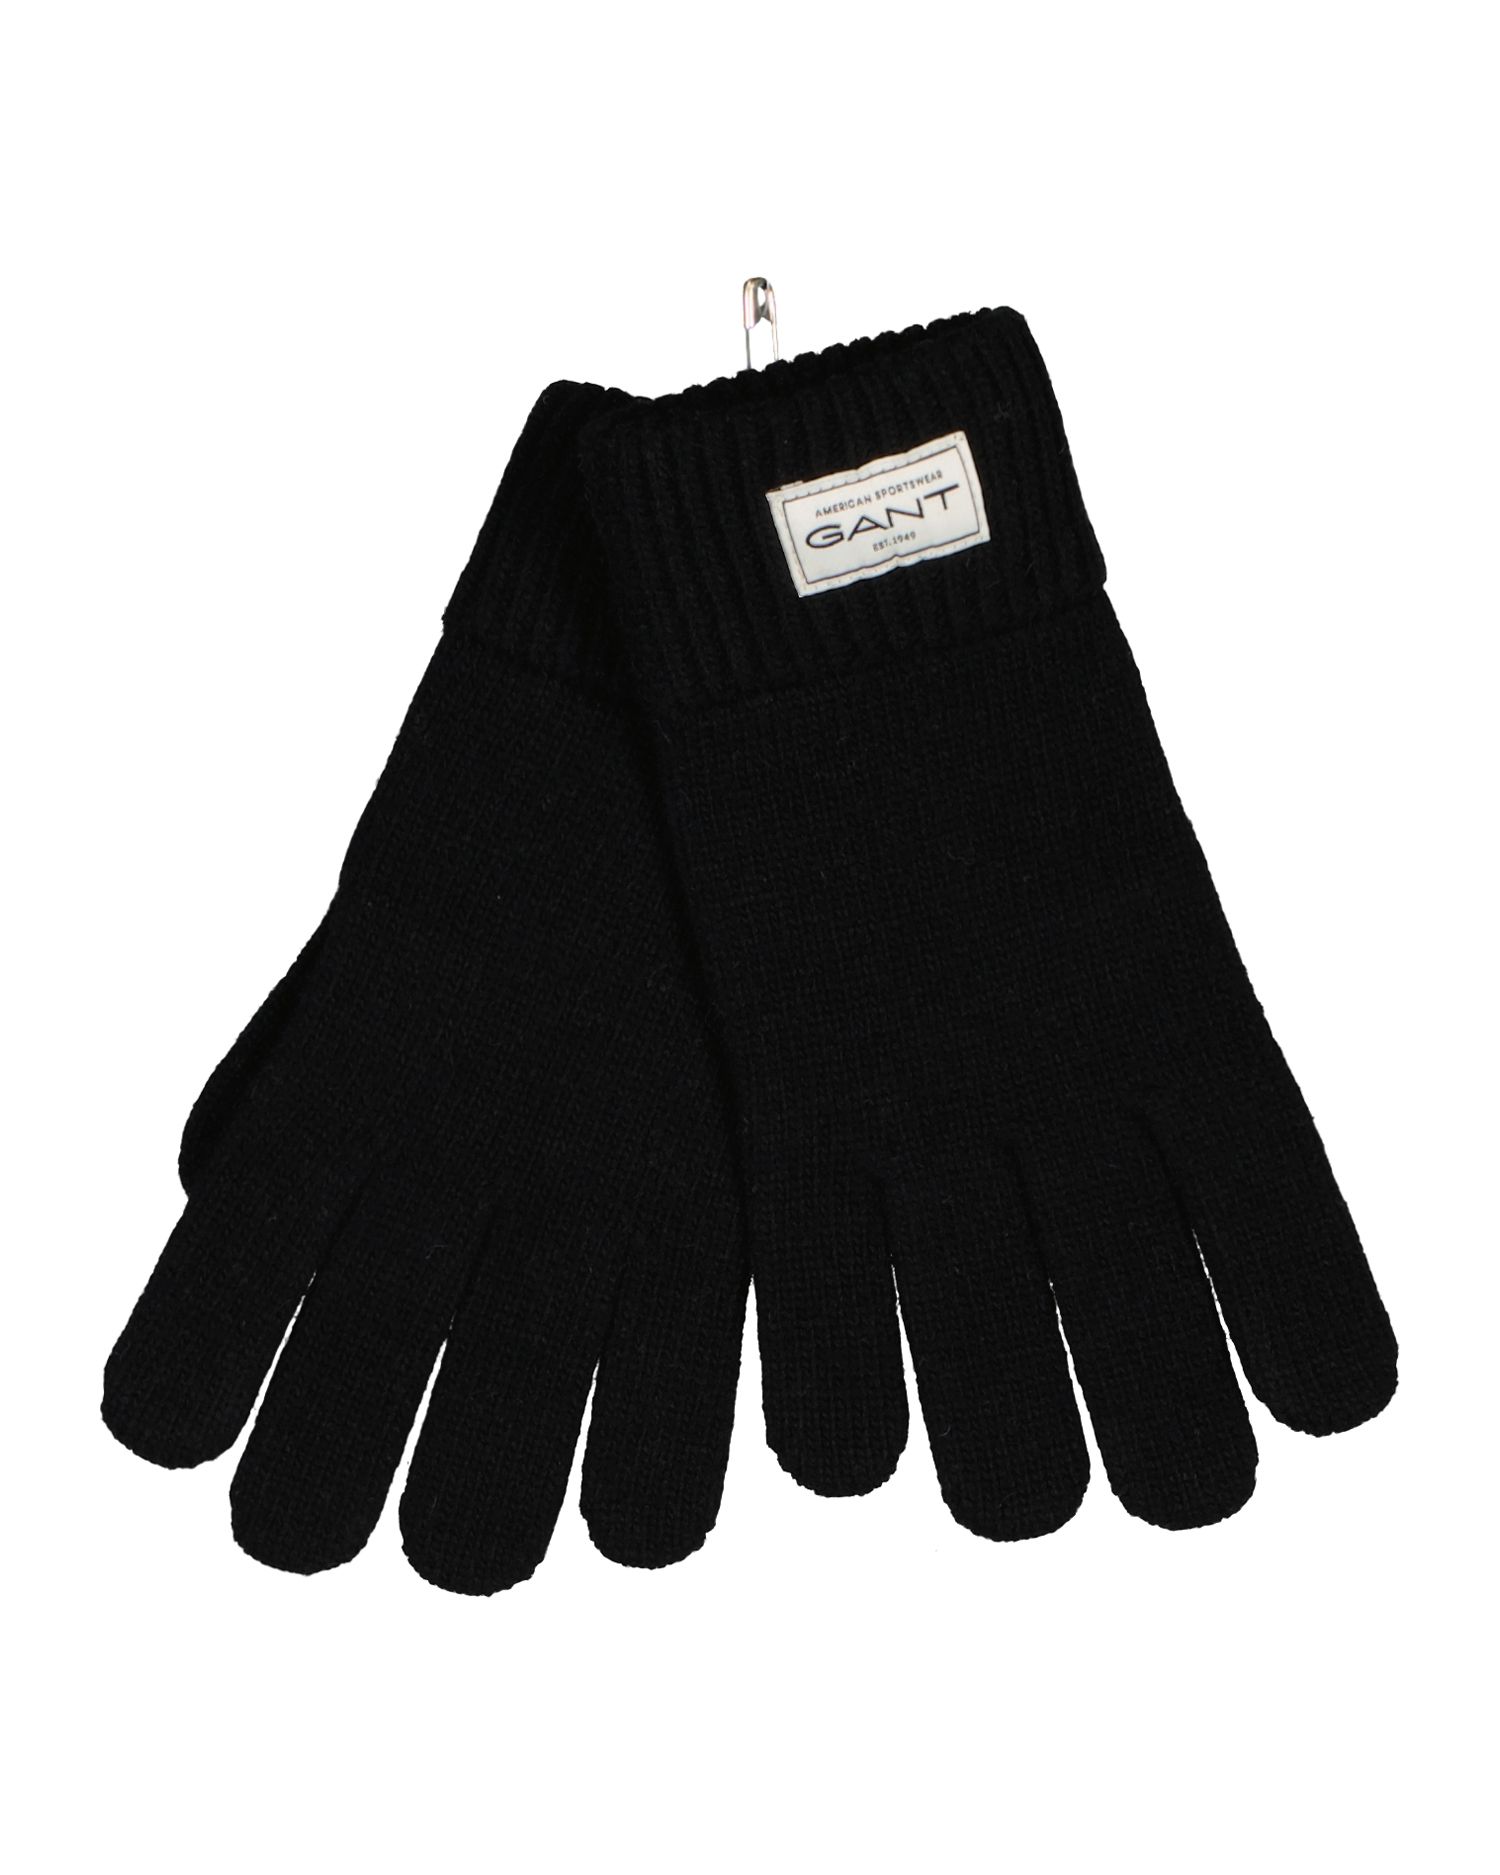 Mens Knitted Wool Gloves